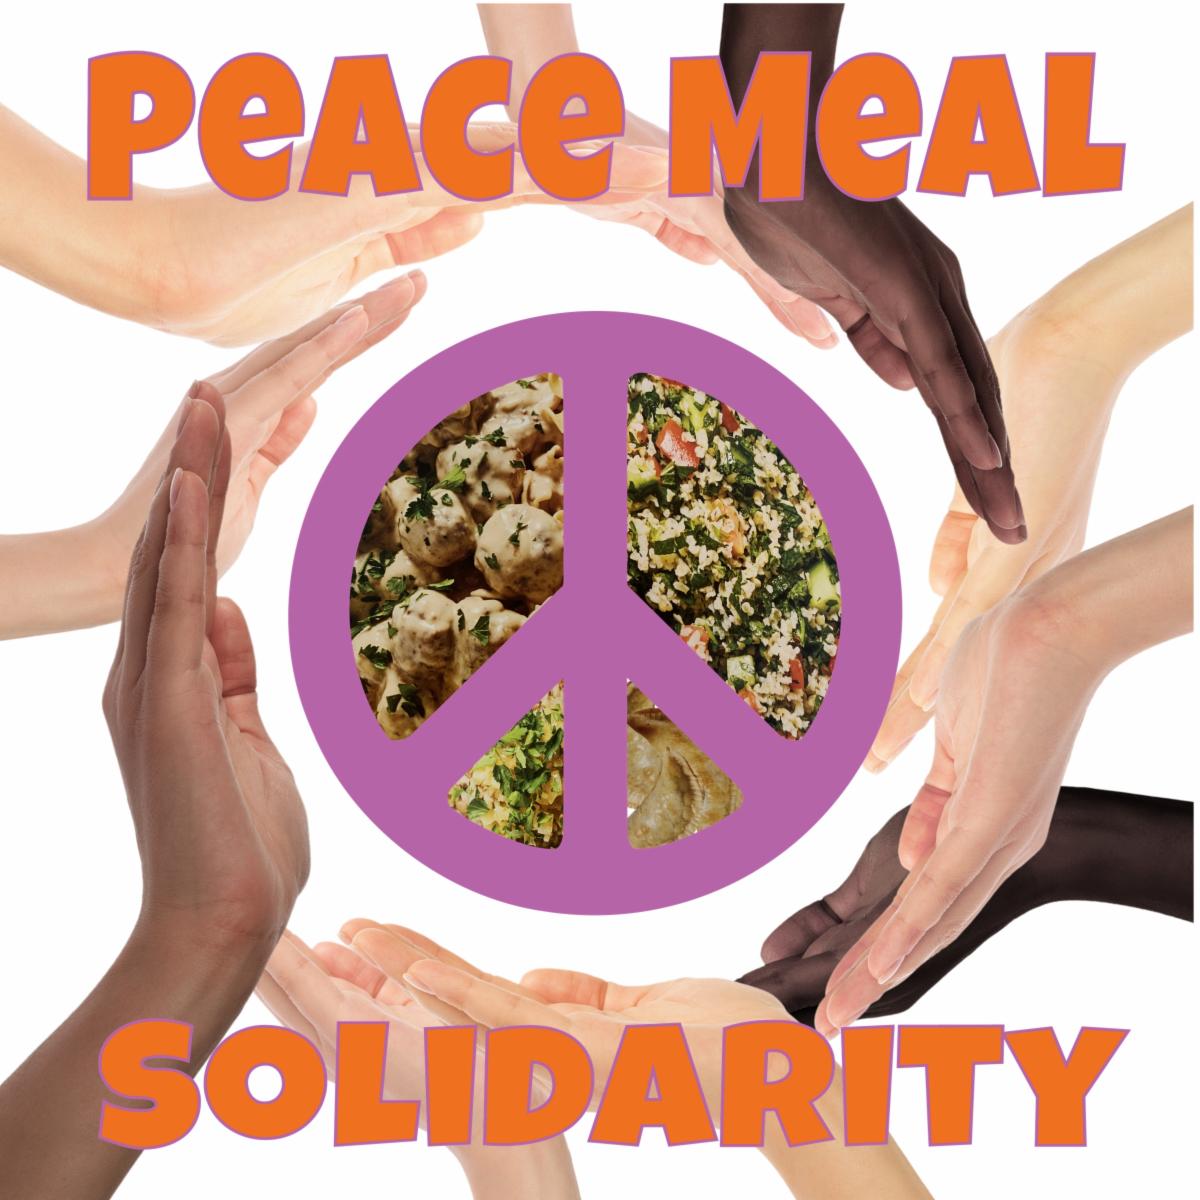 Text says peace meal solidarity, image is of a purple peace sign being cradled by 7 hands, each one from a different person and showing a variety of skin colors.